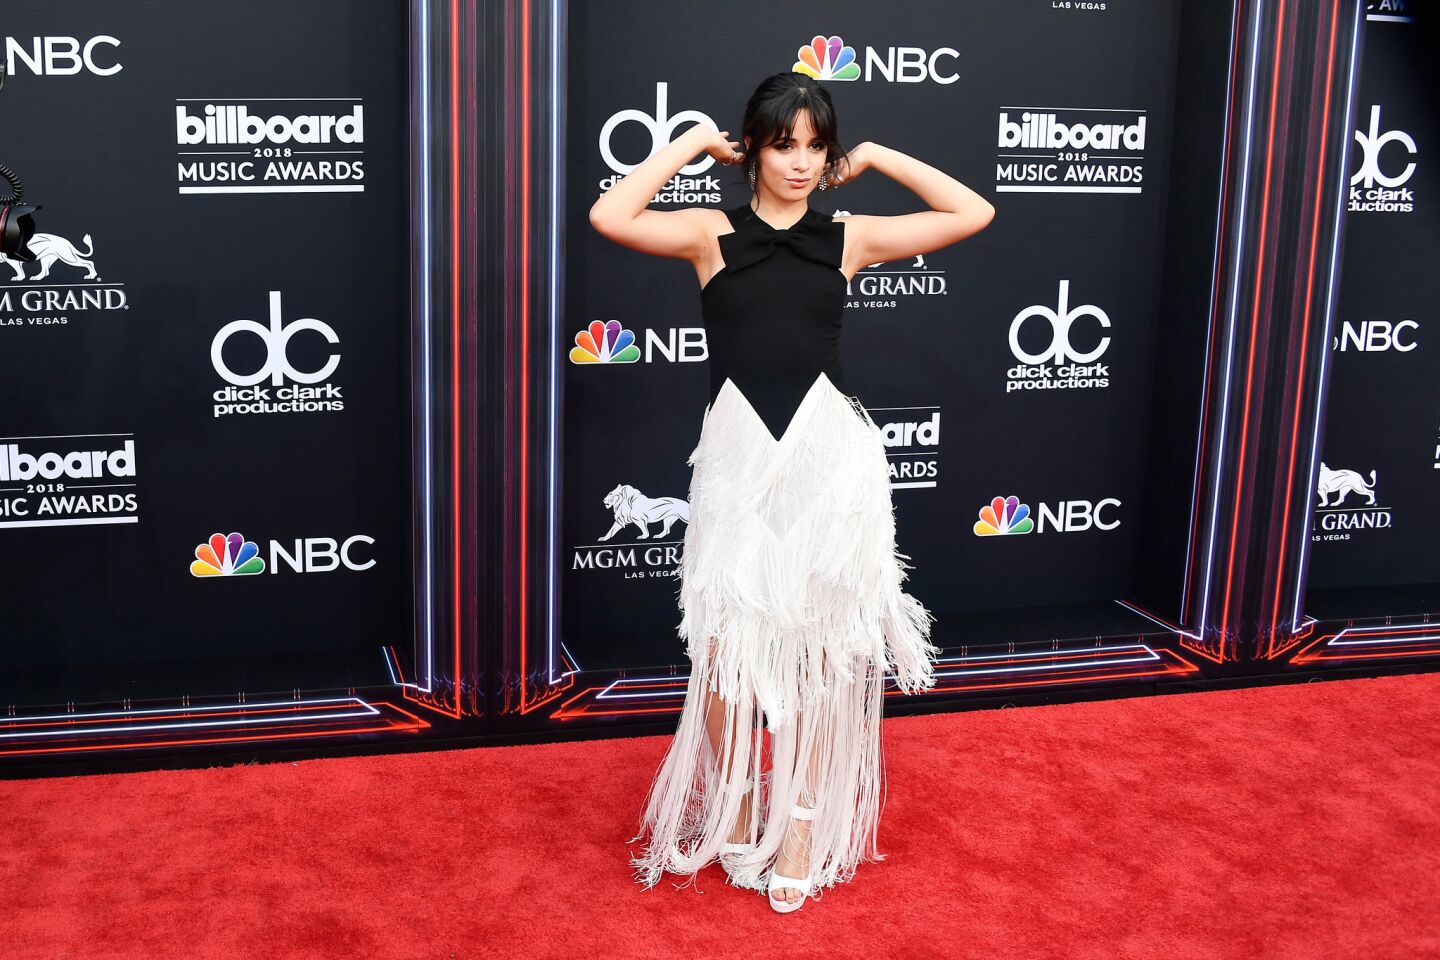 Camila Cabello, fresh from opening for Taylor Swift in Pasadena attends the 2018 Billboard Music Awards at MGM Grand Garden Arena in Las Vegas.